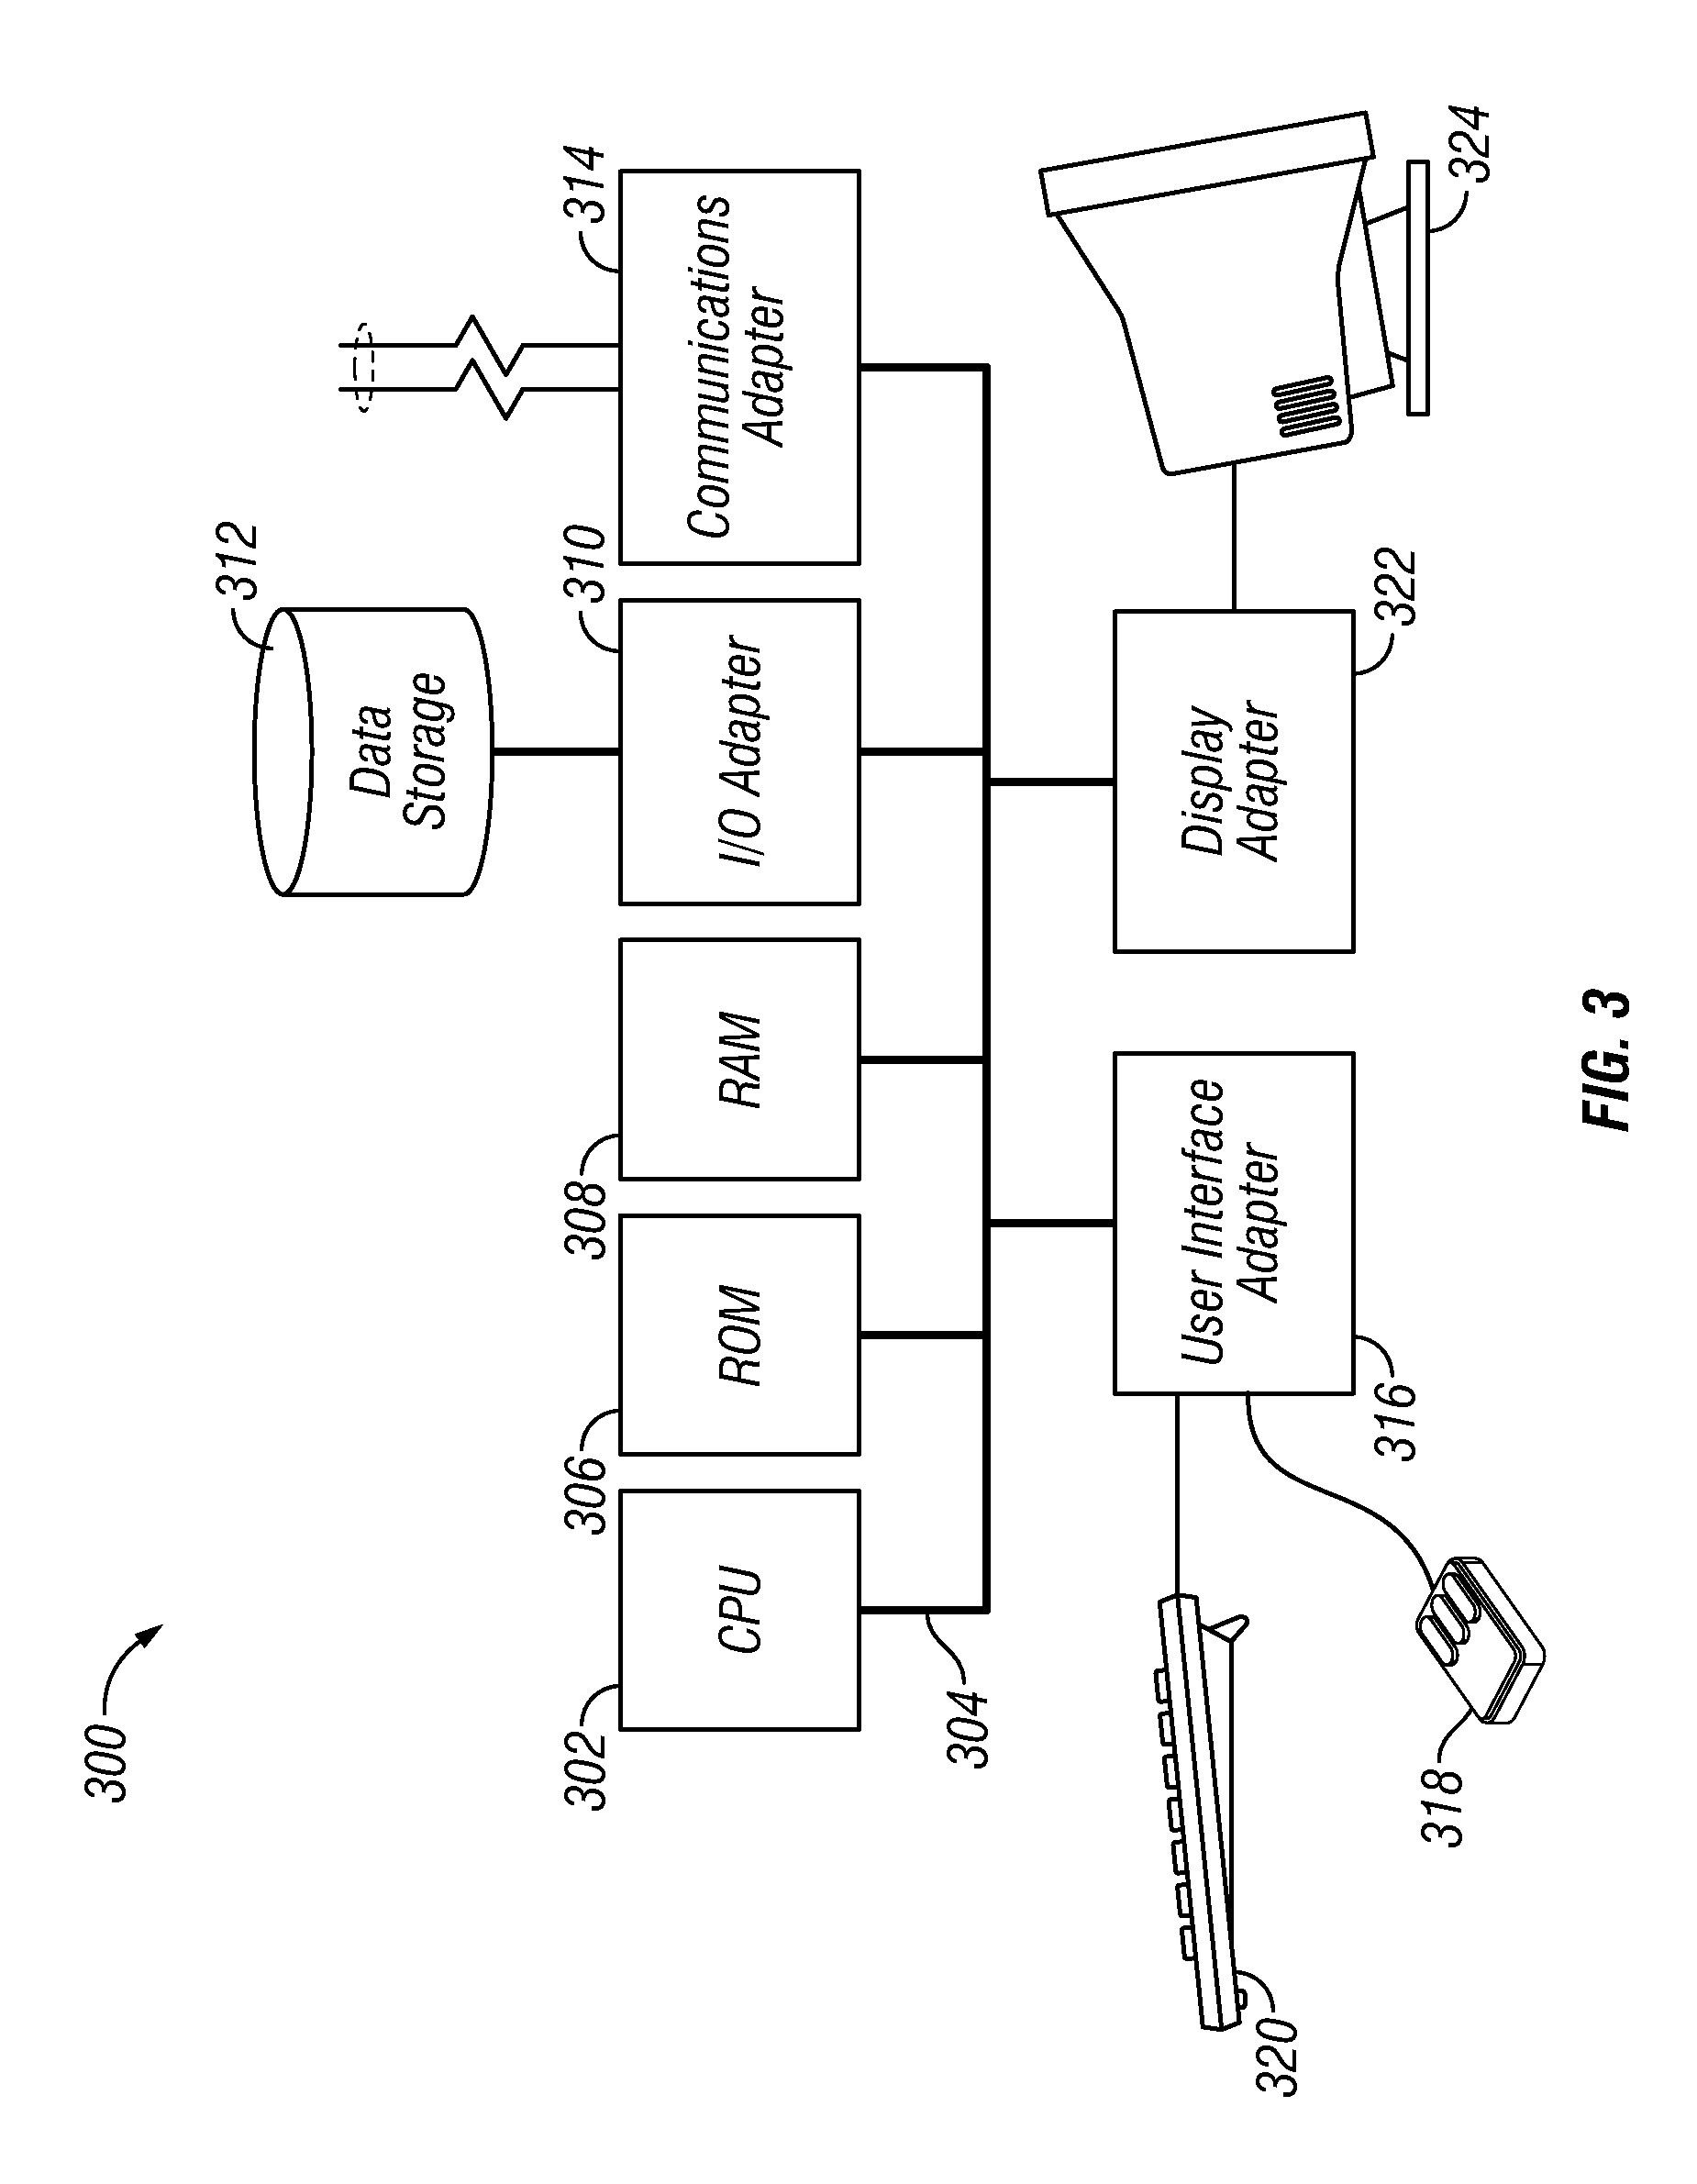 Apparatus, system and method for rapid cohort analysis